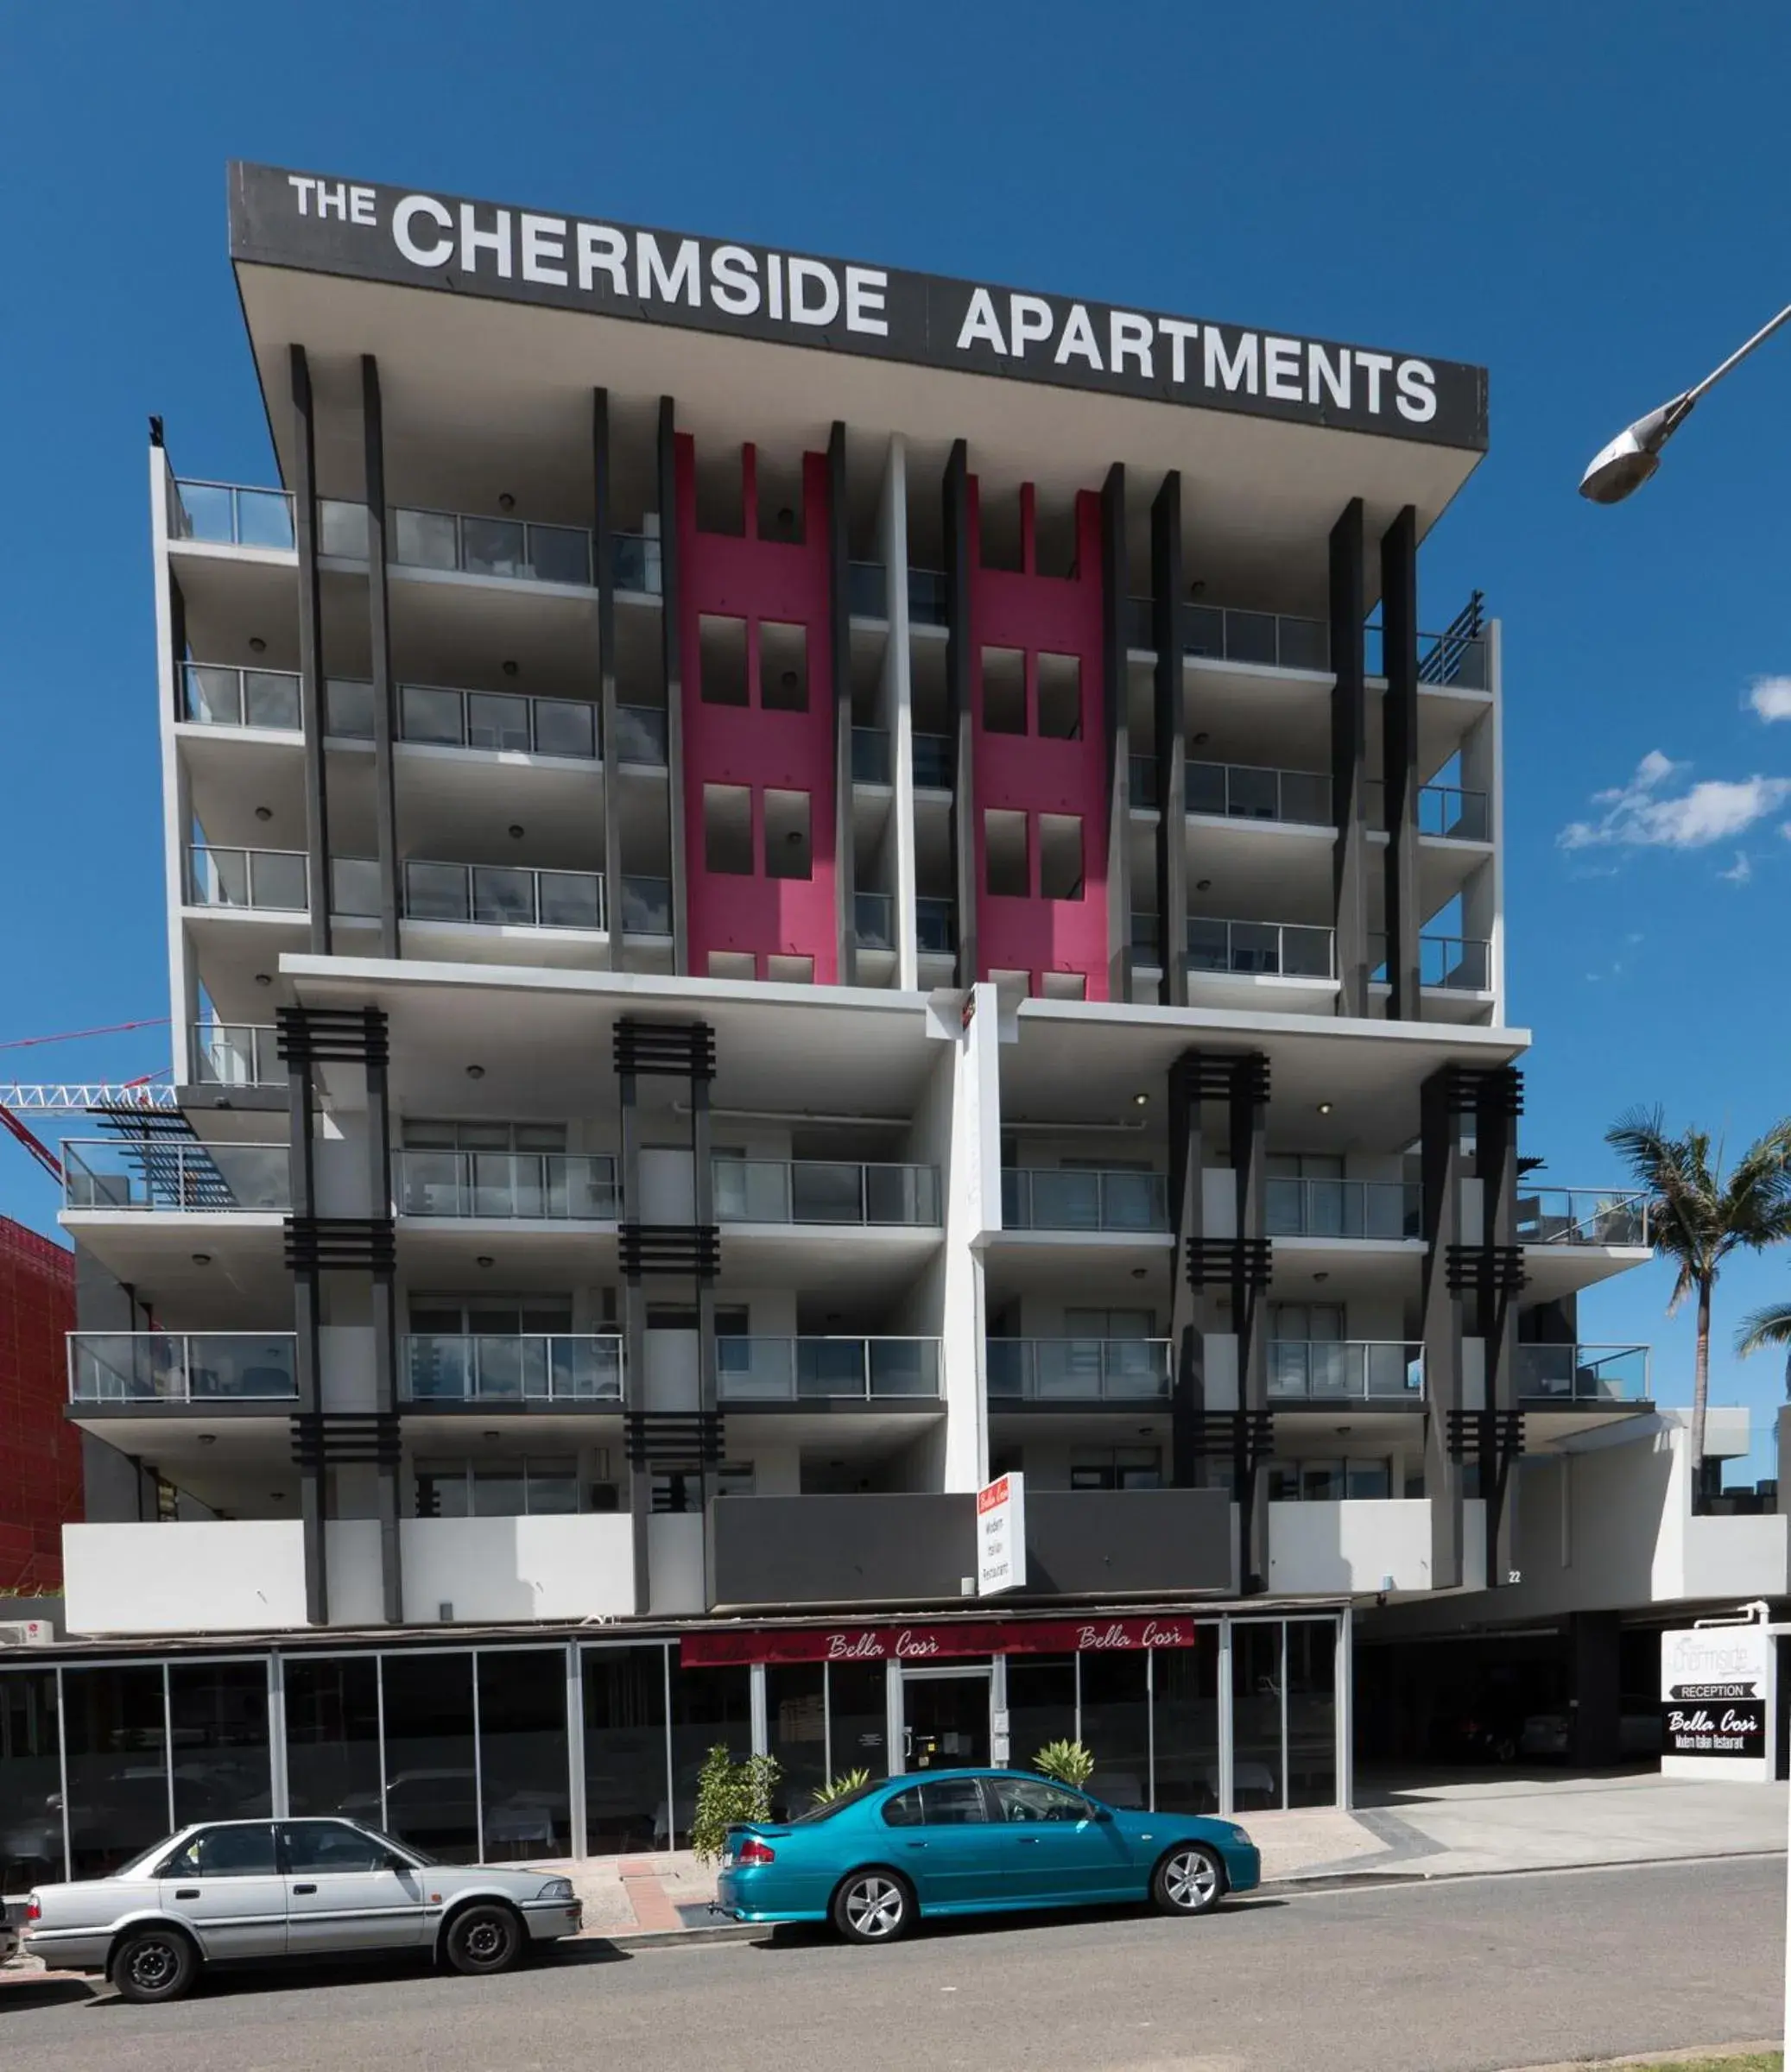 Property Building in The Chermside Apartments